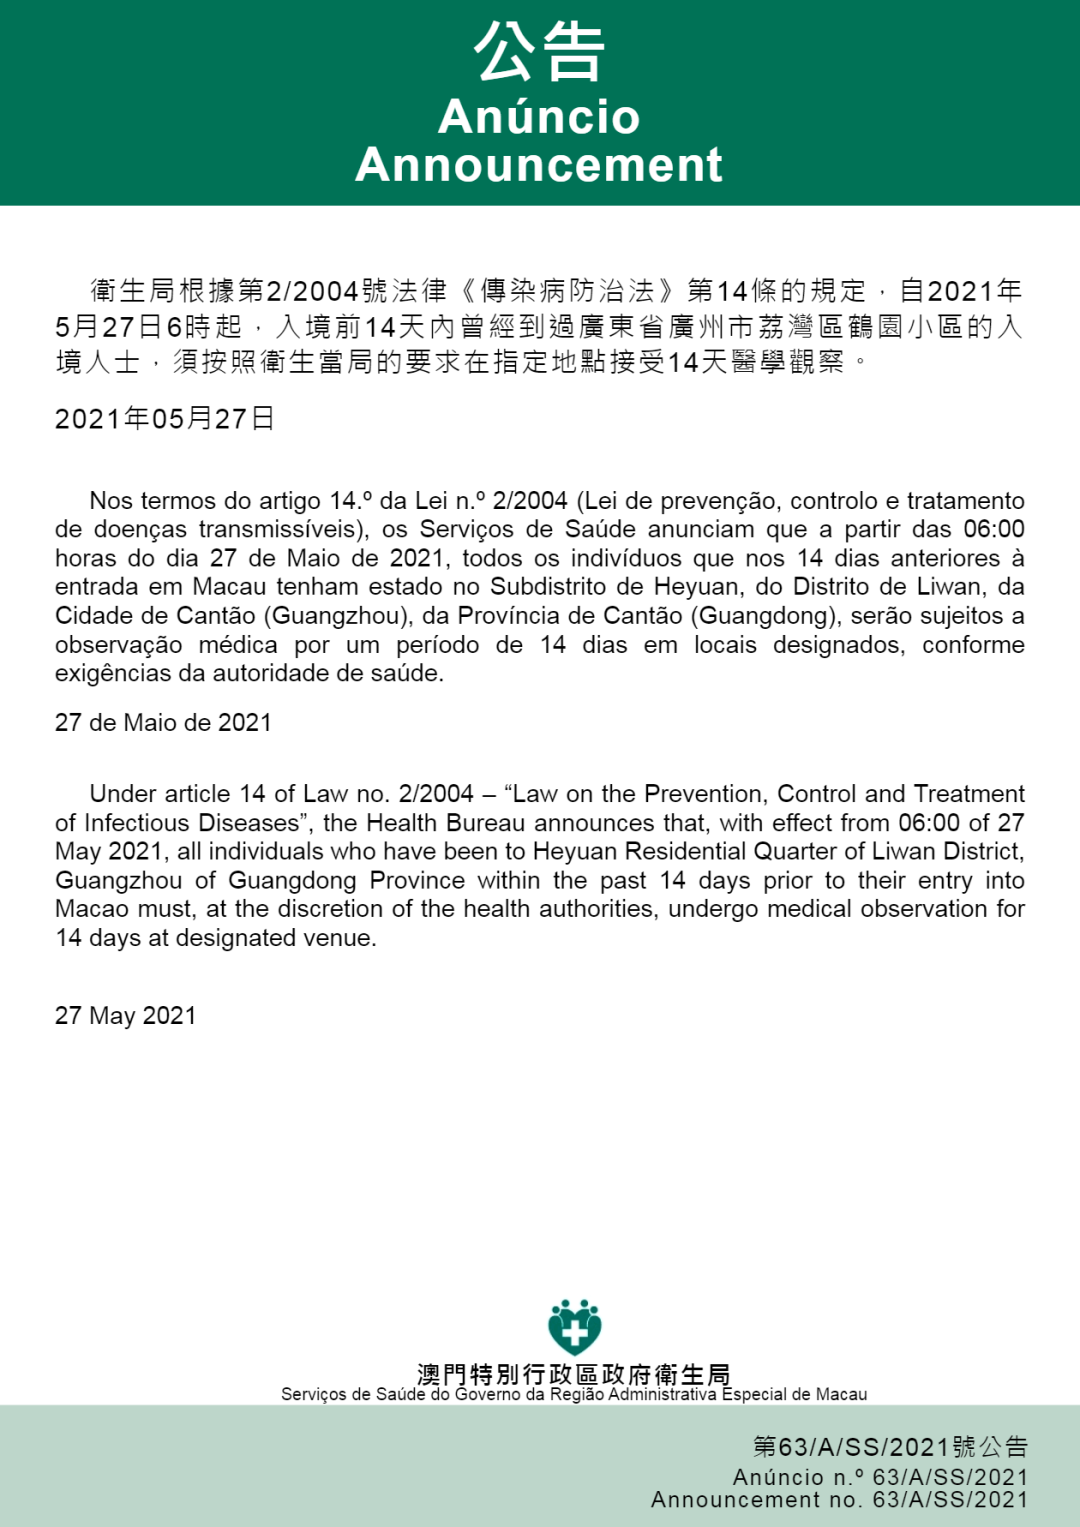 updates on travel measures & covid-19 situation in guangdong